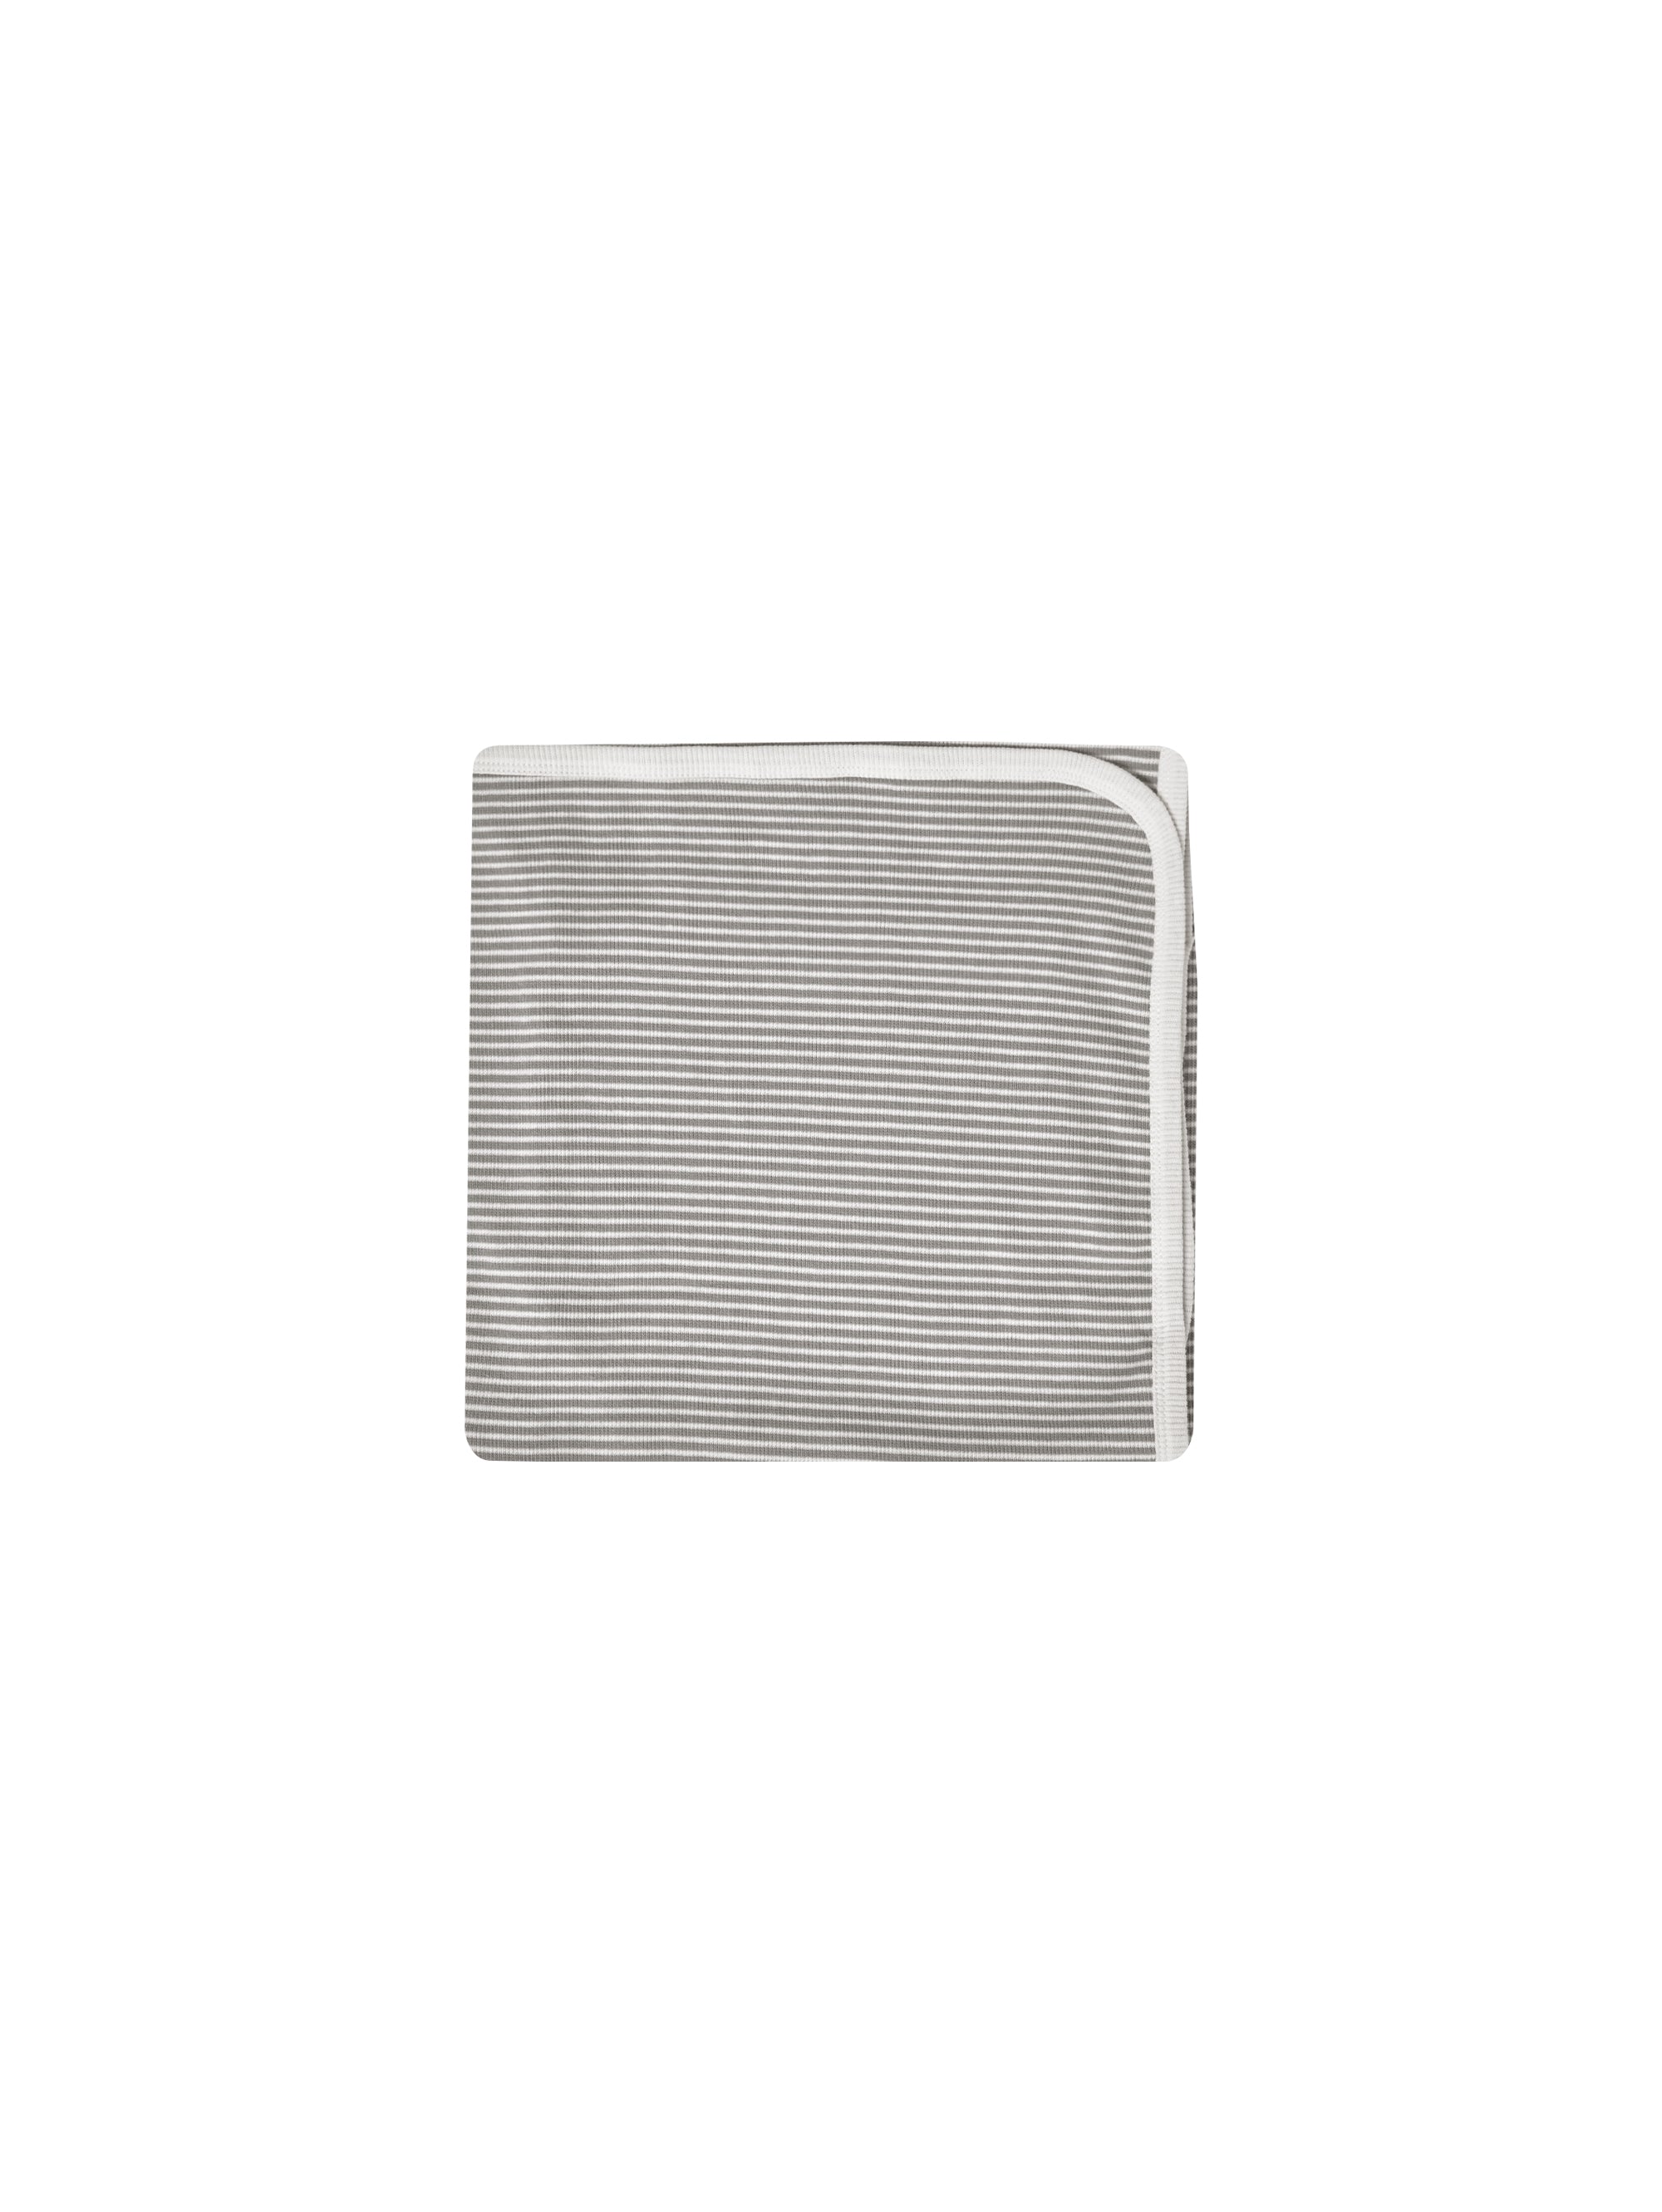 Quincy Mae Ribbed Baby Blanket - Lagoon Micro Stripe